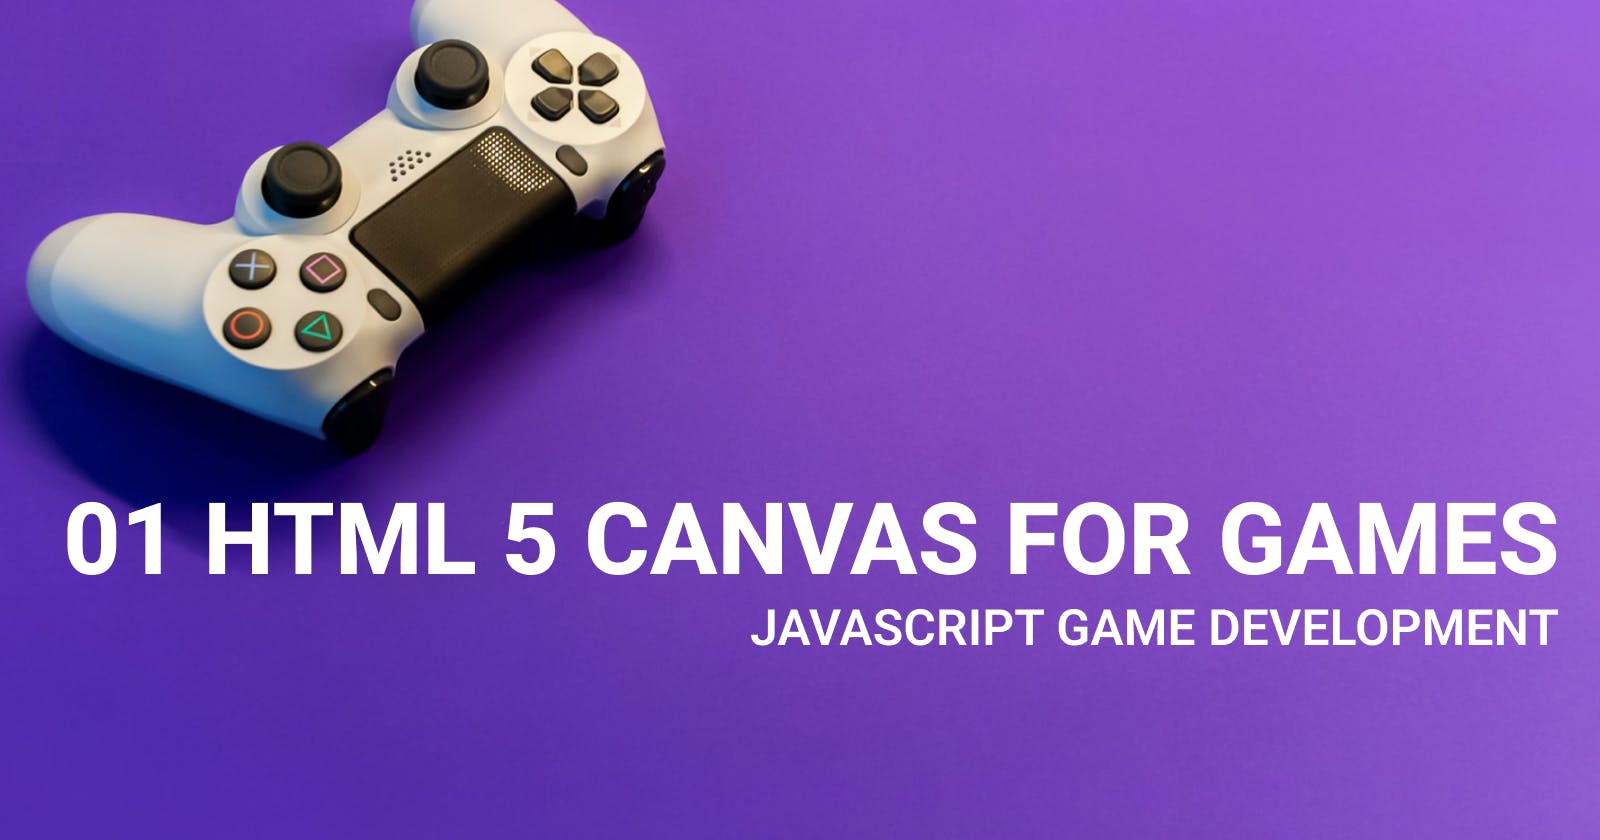 01 HTML 5 Canvas for Games